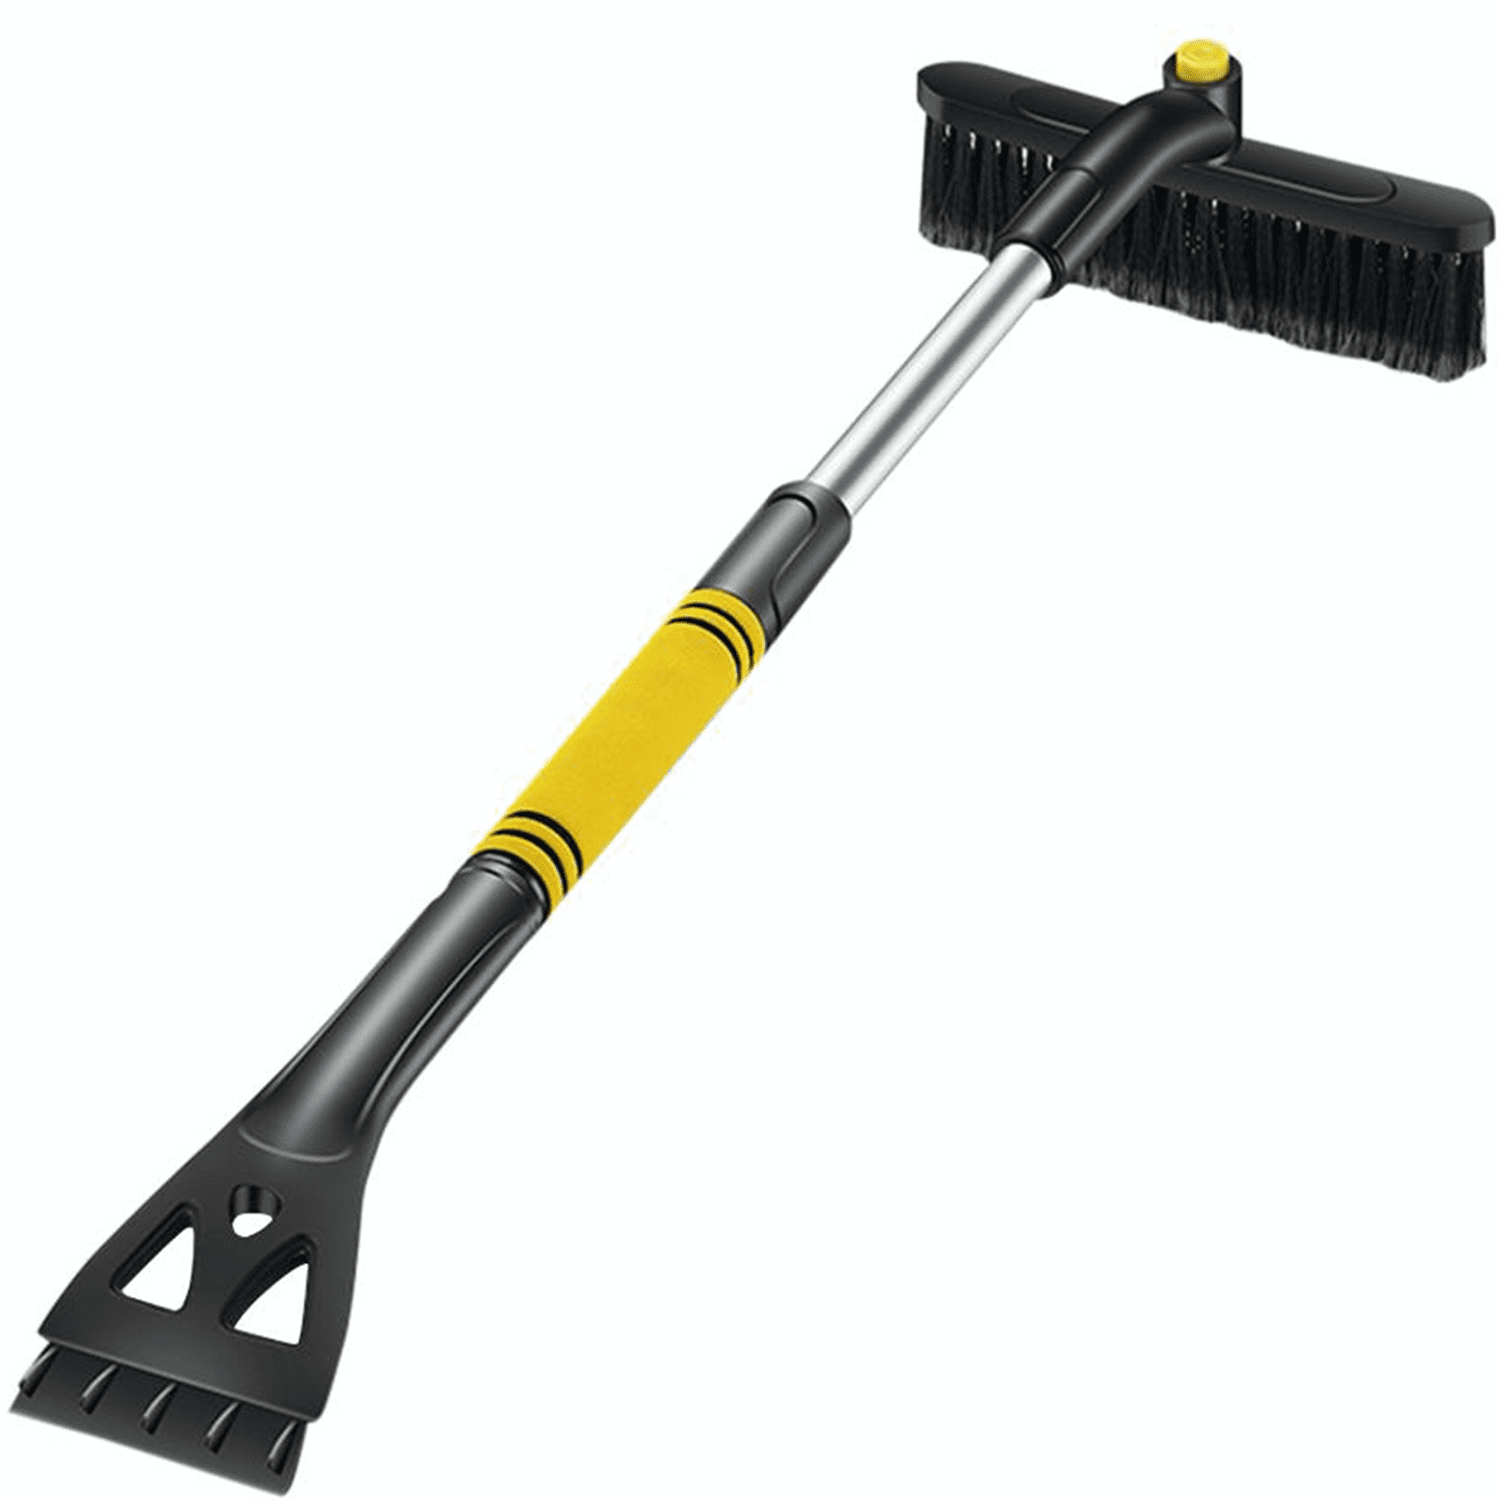 YARNOW Car Snow Brush with Ice Scraper 1 Extendable Snow Removal Tool with Foam Handle Detachable Snow Remover for Car Windscreen in 3